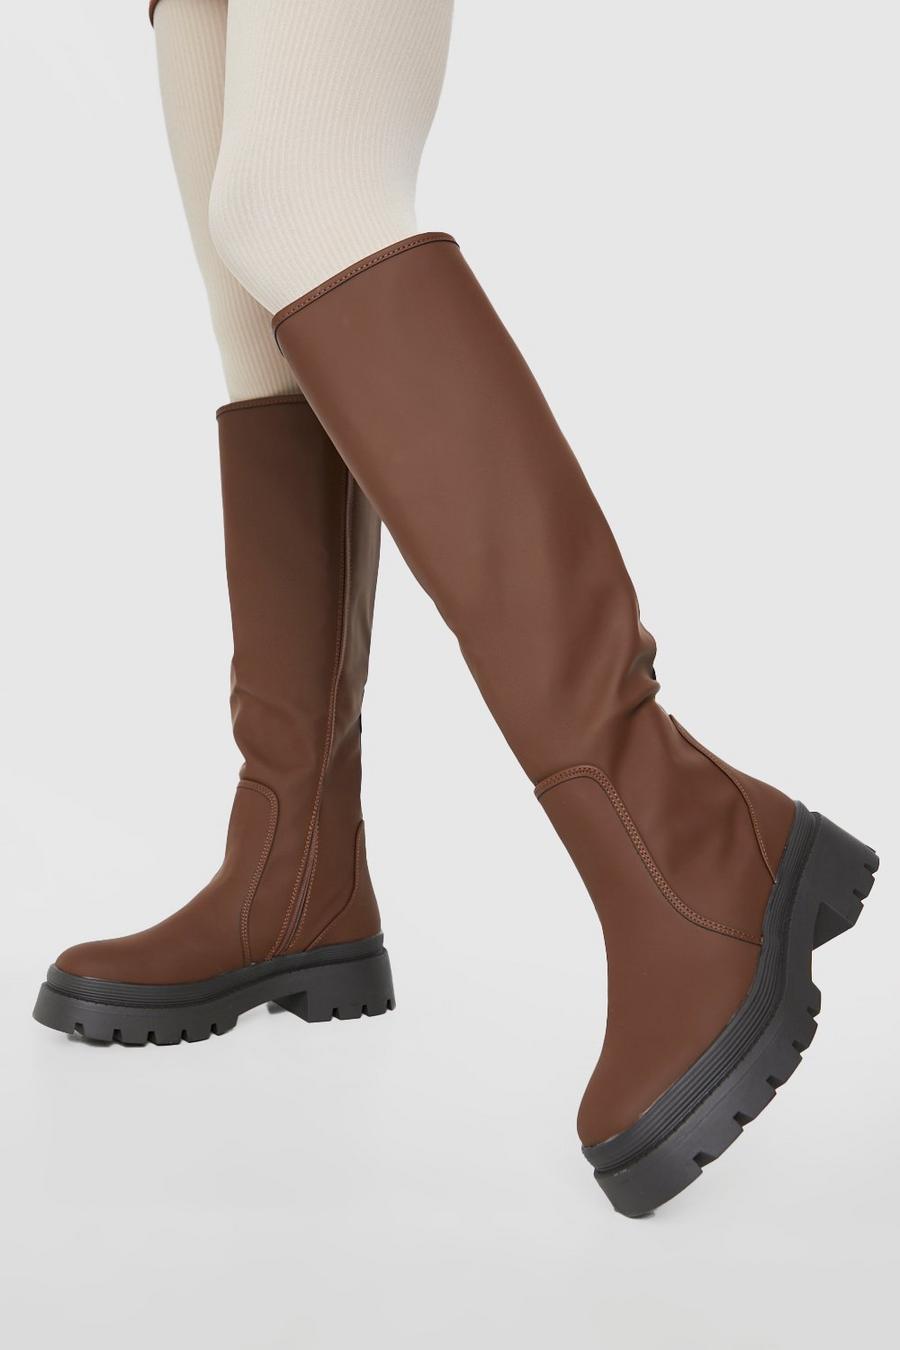 Chocolate marron Rubber Knee High Boots